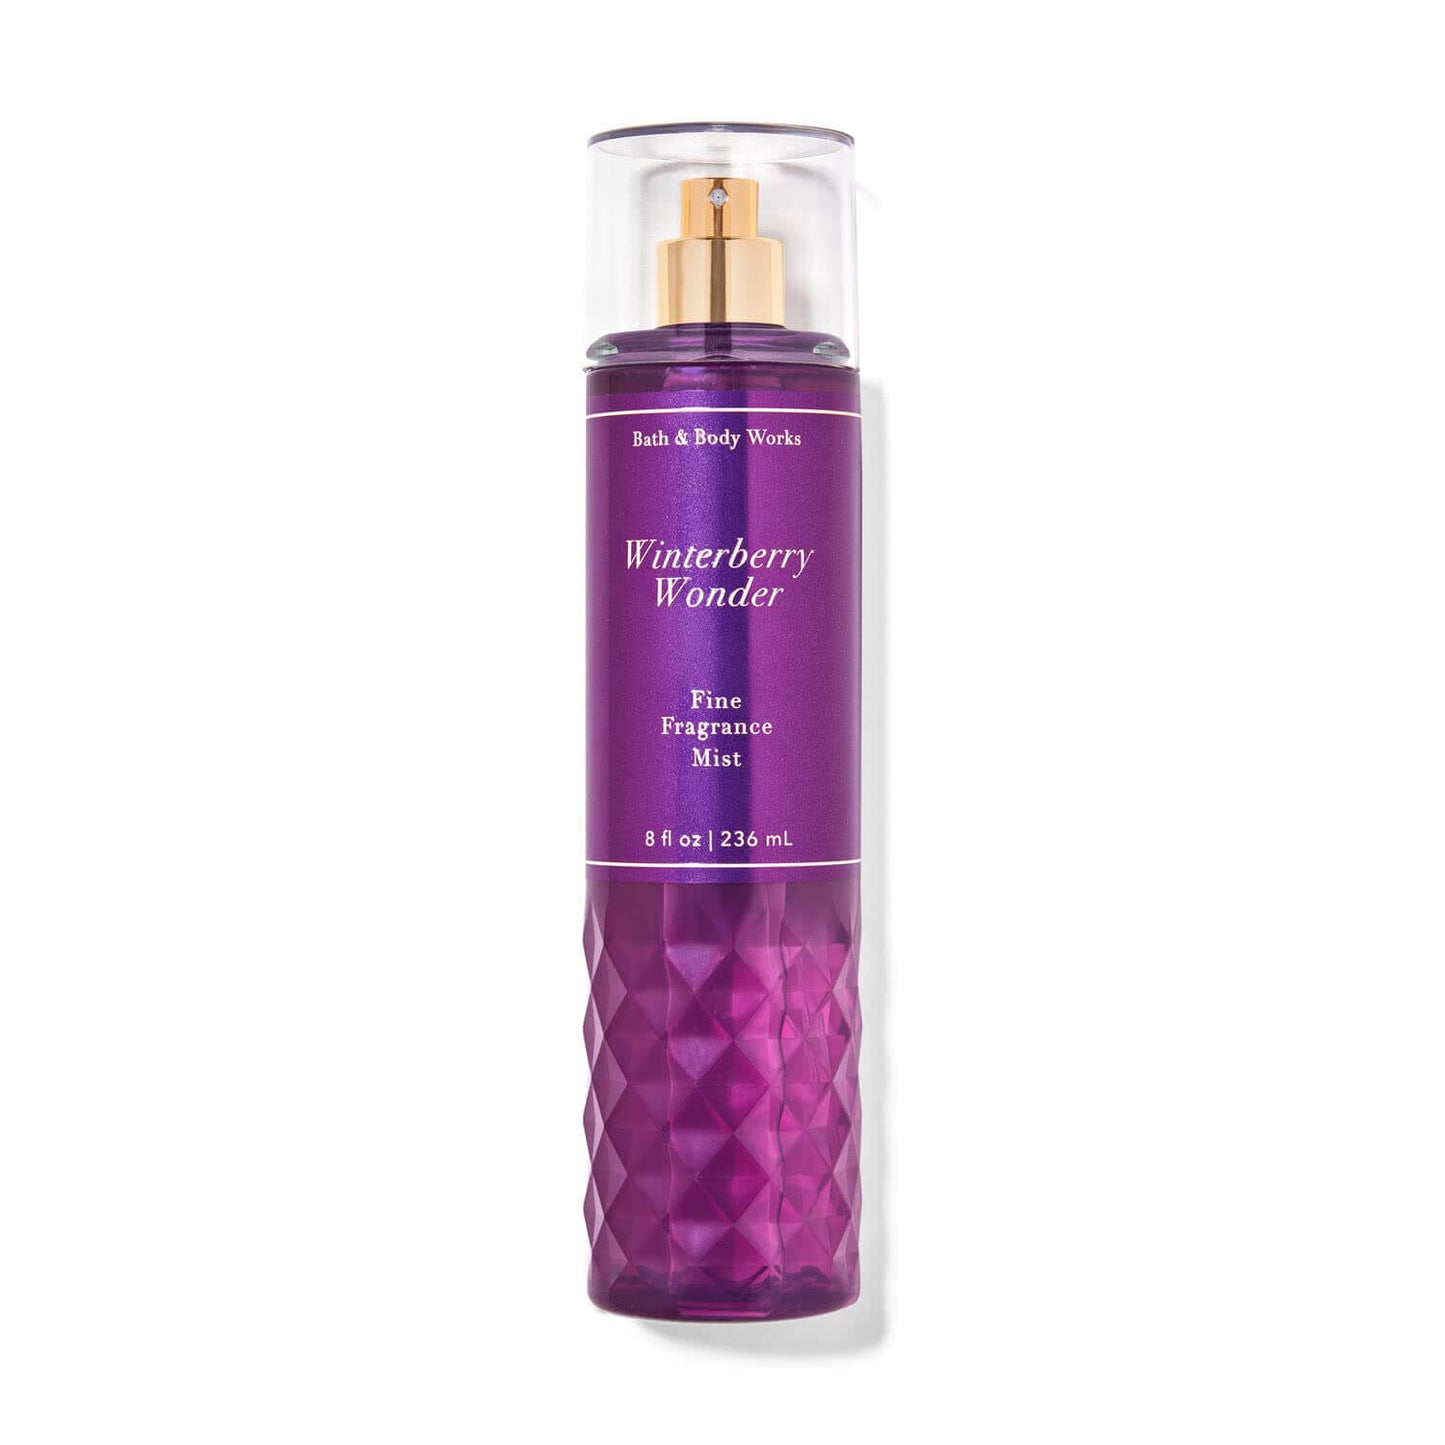 buy bath and body works mist in winterberry wonder fragrance available for delivery in  Pakistan